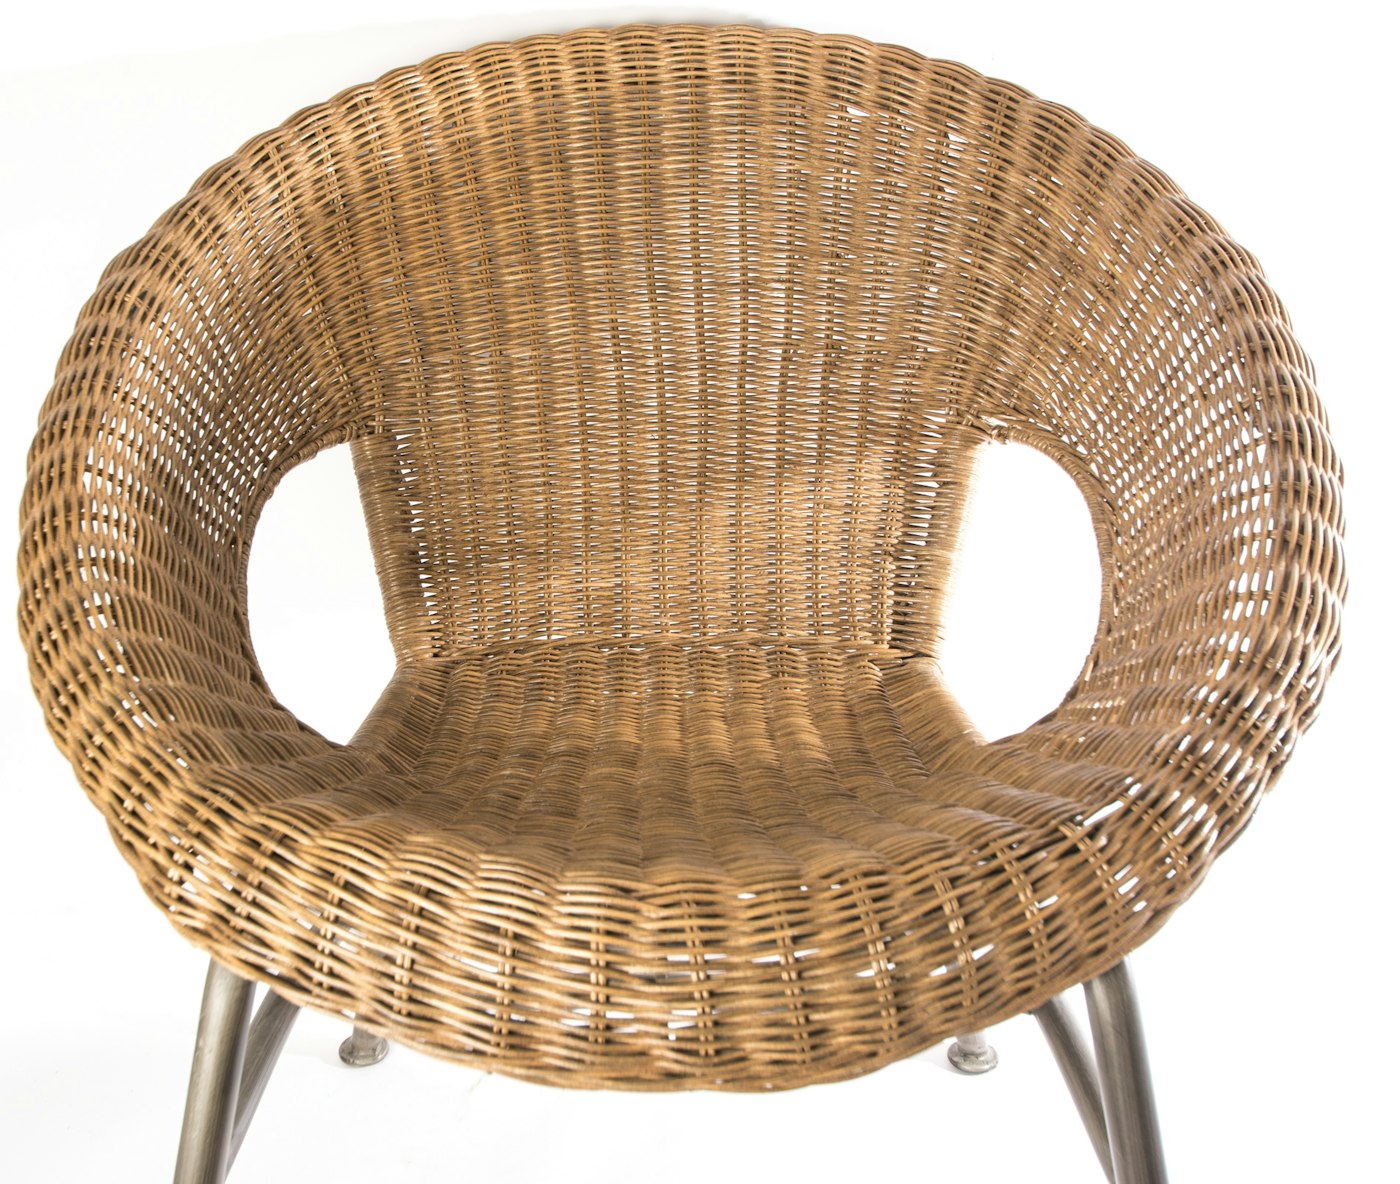 Pair of Modern Style Wicker Lounge Chairs : EBTH